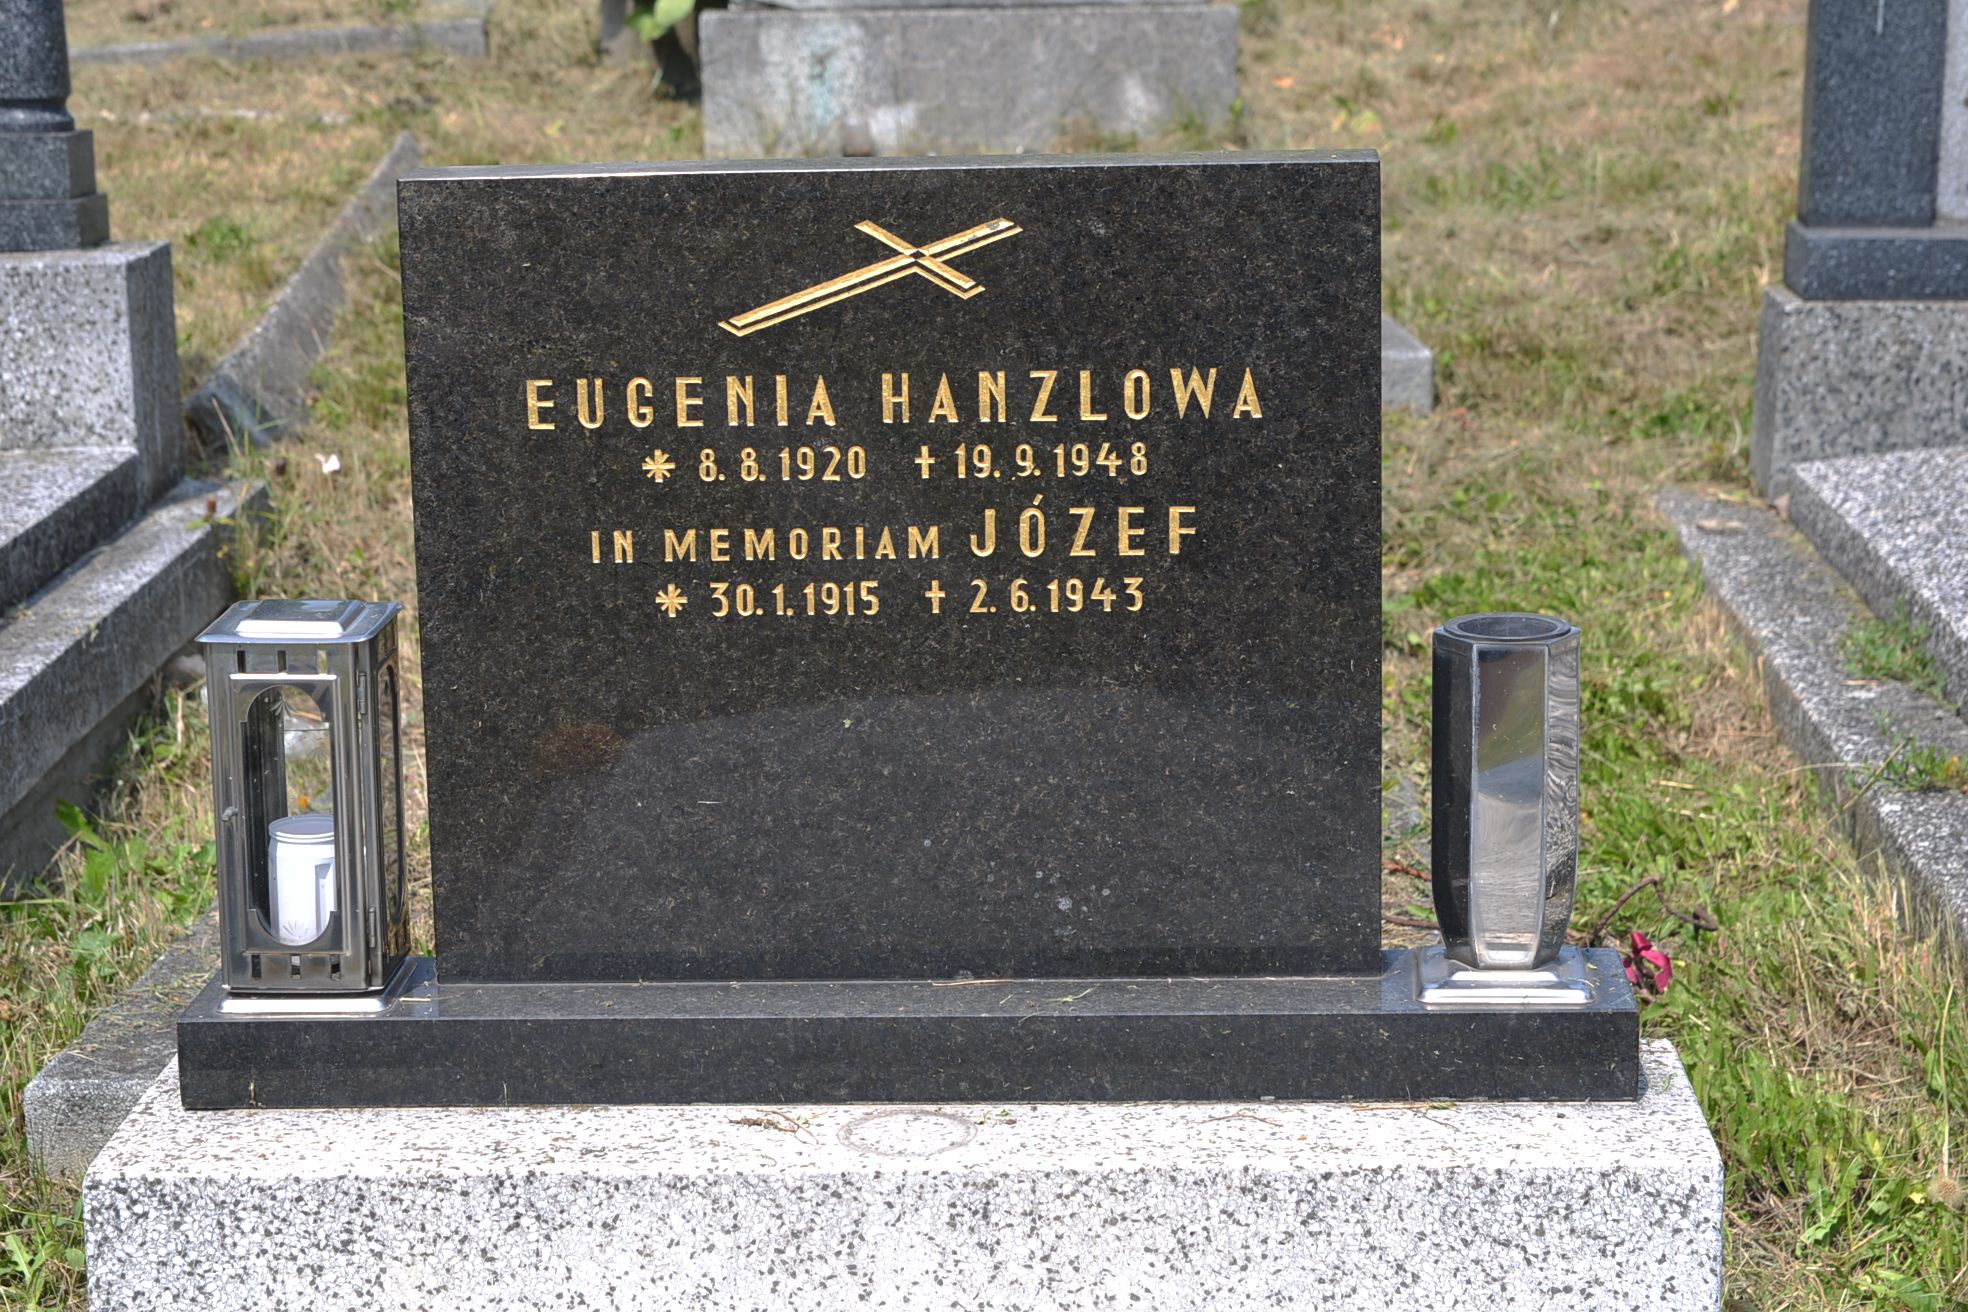 Inscription plaque from the tomb of Eugenia and Josef Hanzl, cemetery in Karviná Doły, Czech Republic, as of 2022